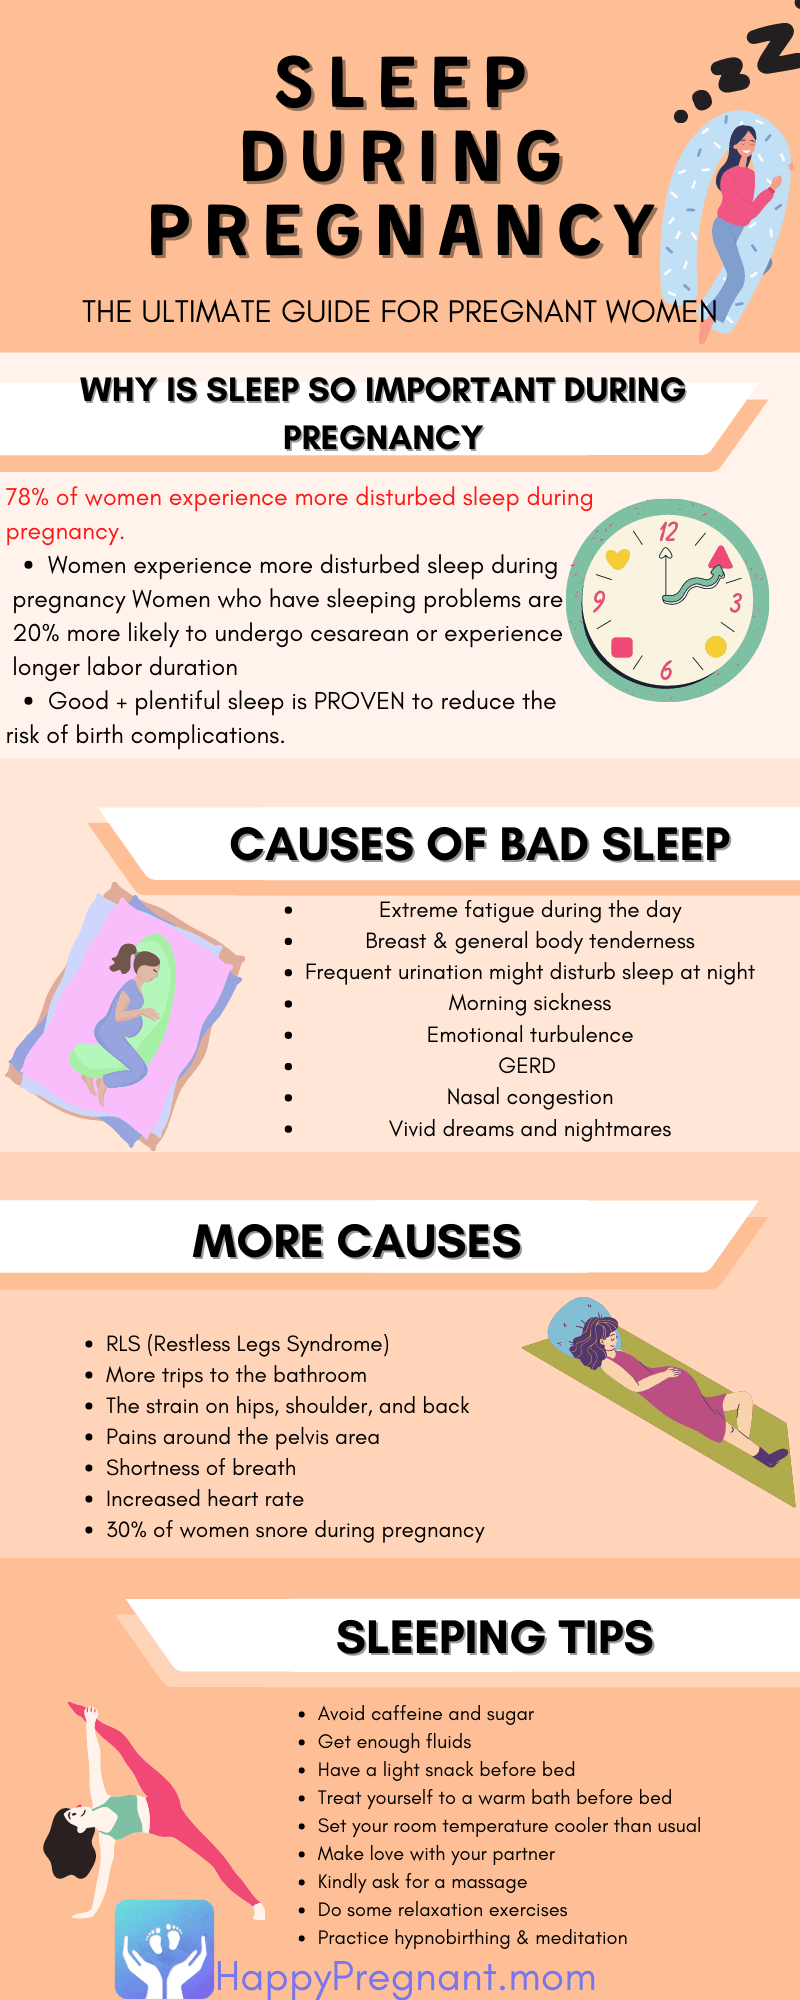 Sleep during pregnancy guide